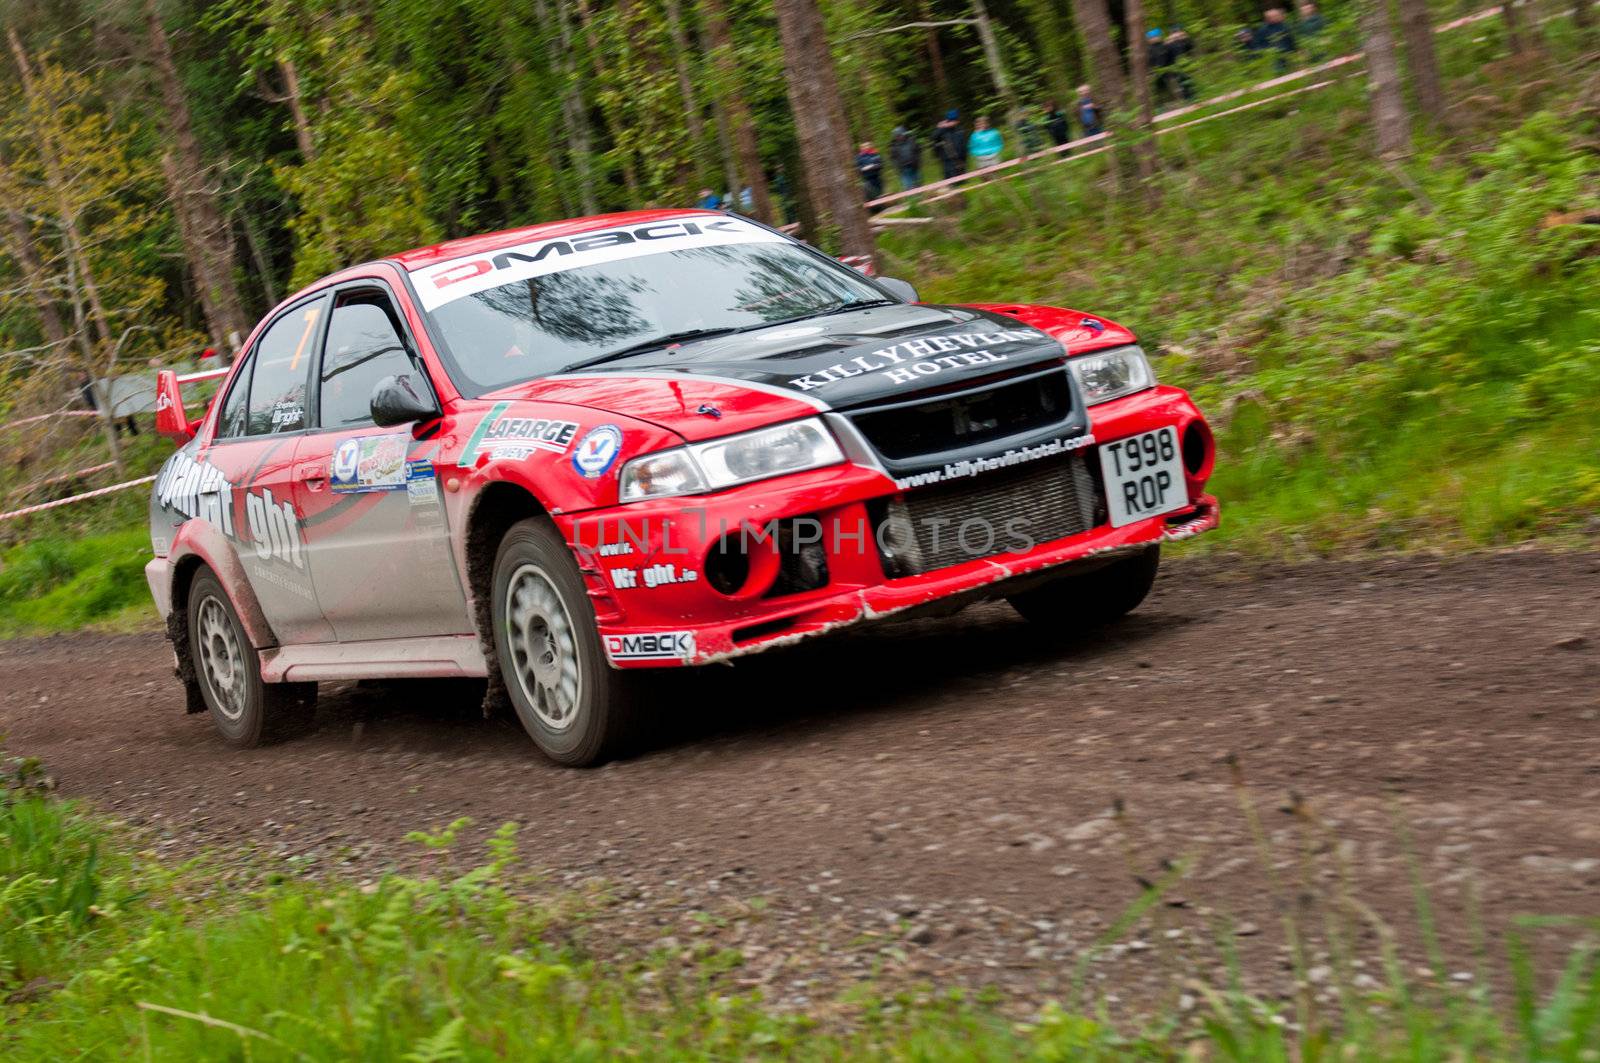 S. Wright driving Mitsubishi Evo by luissantos84